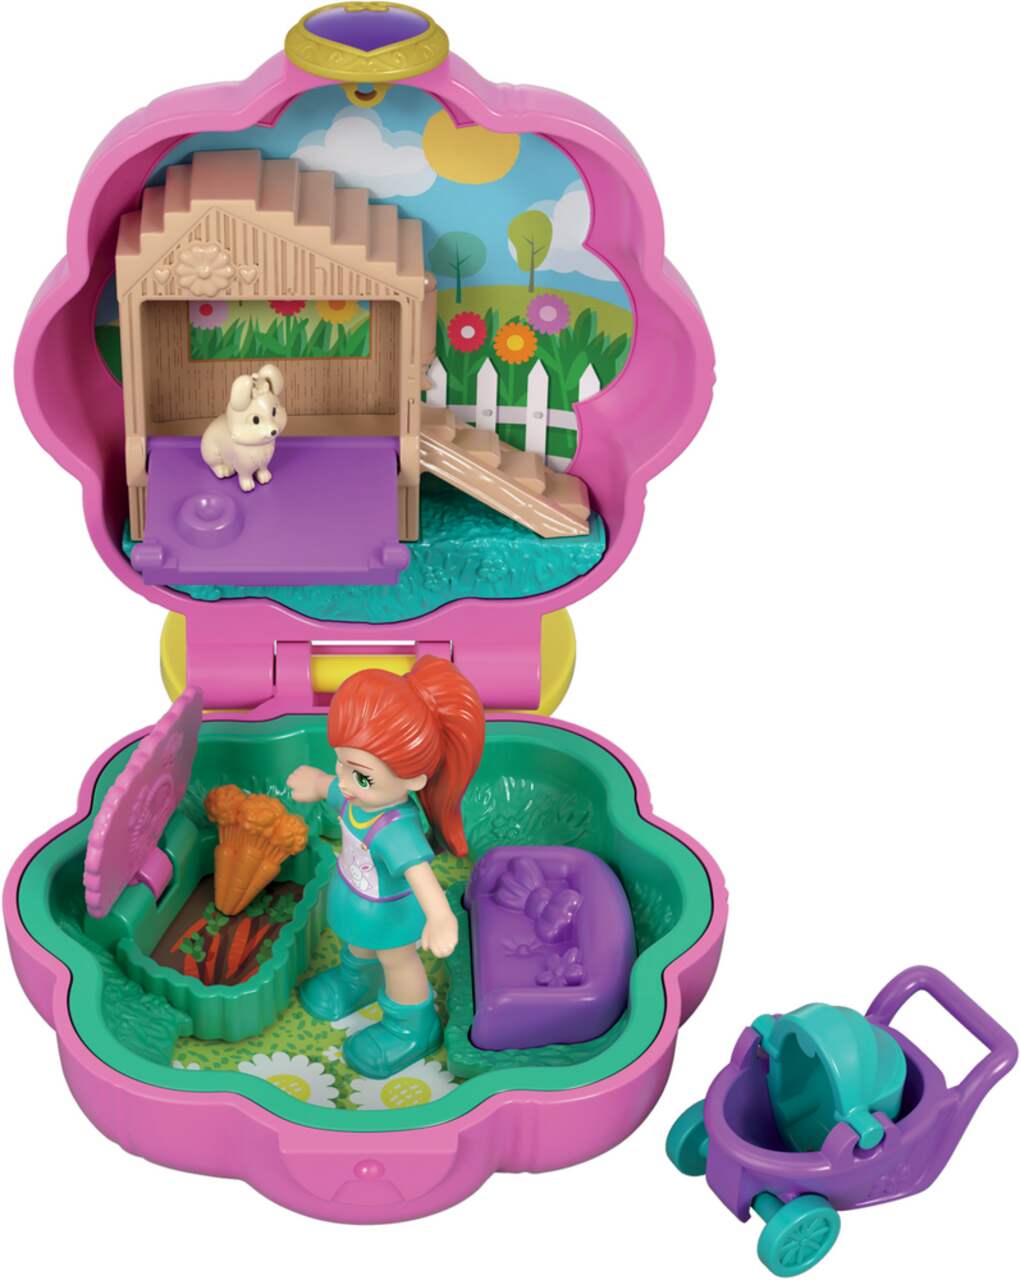 Polly Pocket™ Pocket World Secret Reveal Toy w/Micro Dolls & Accessories,  Ages 4+